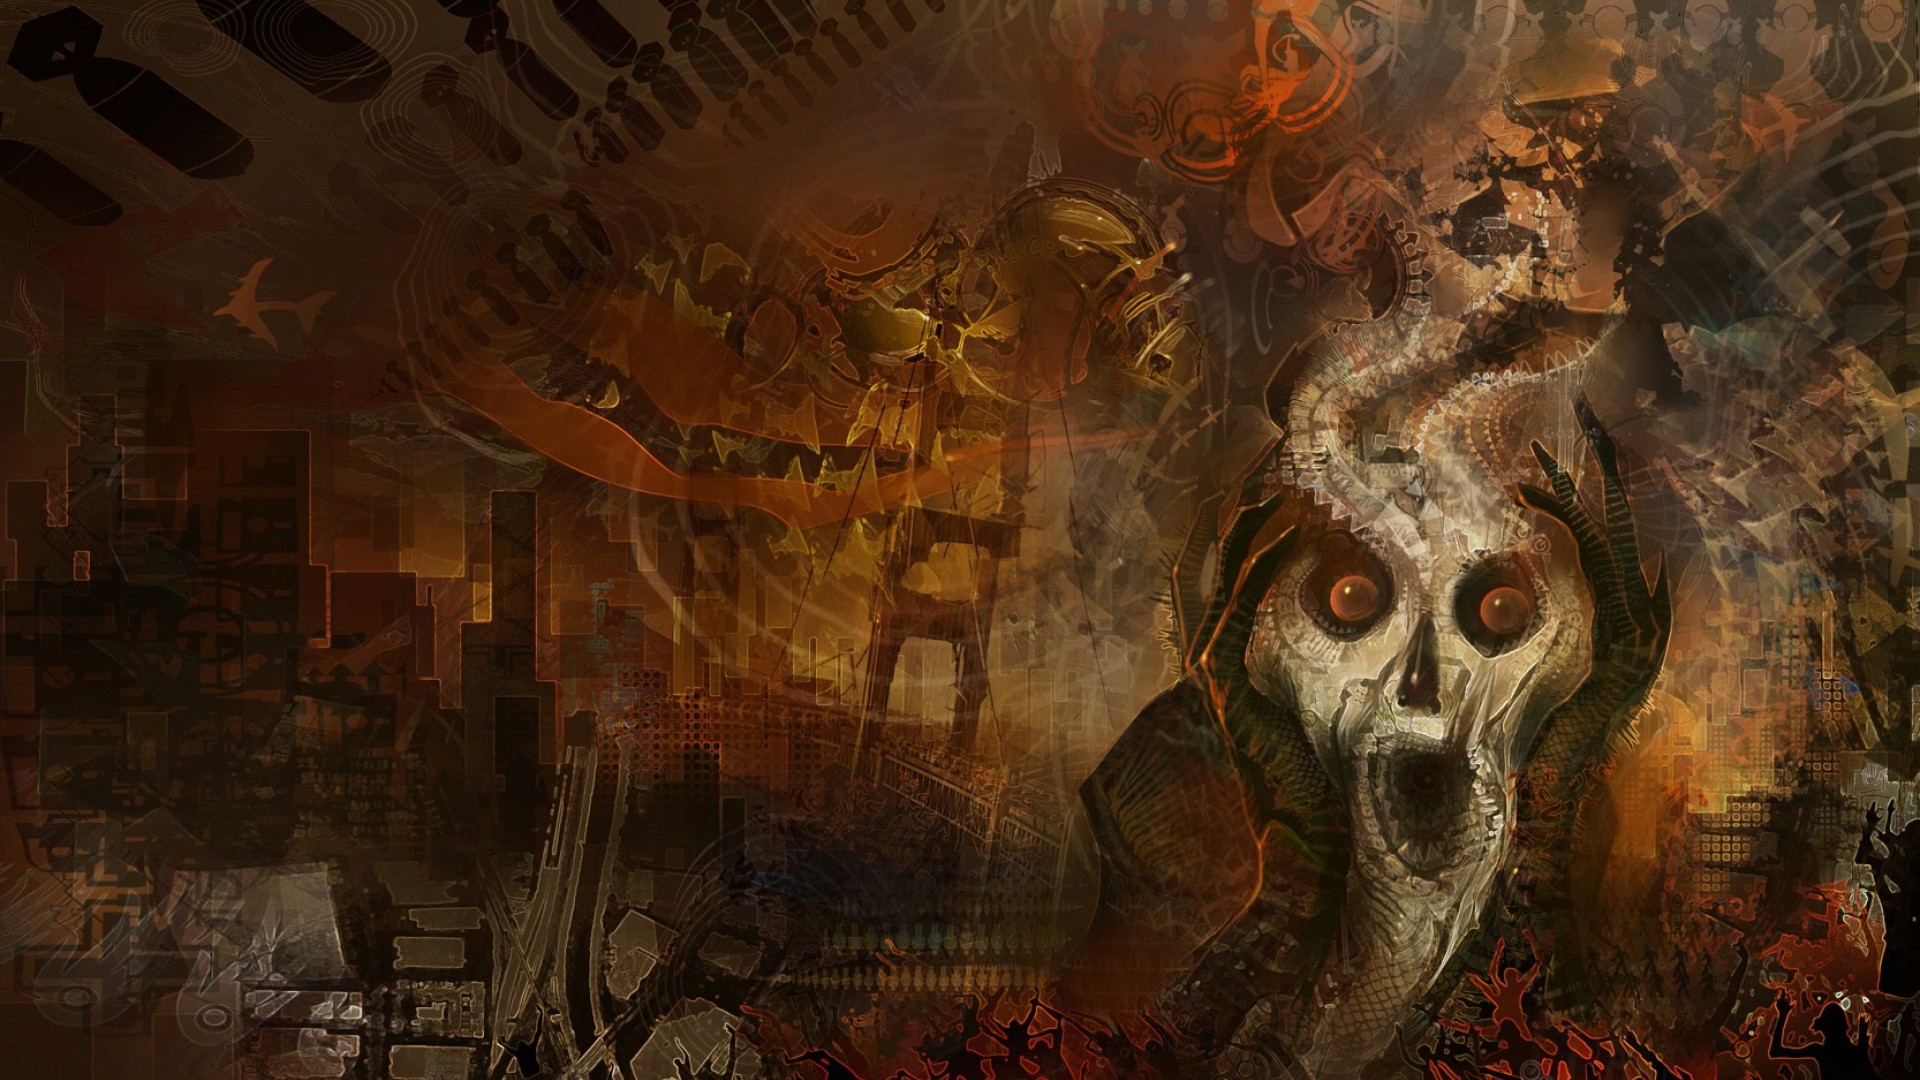 Android Jones Hell The Scream Abstract Artwork , HD Wallpaper & Backgrounds